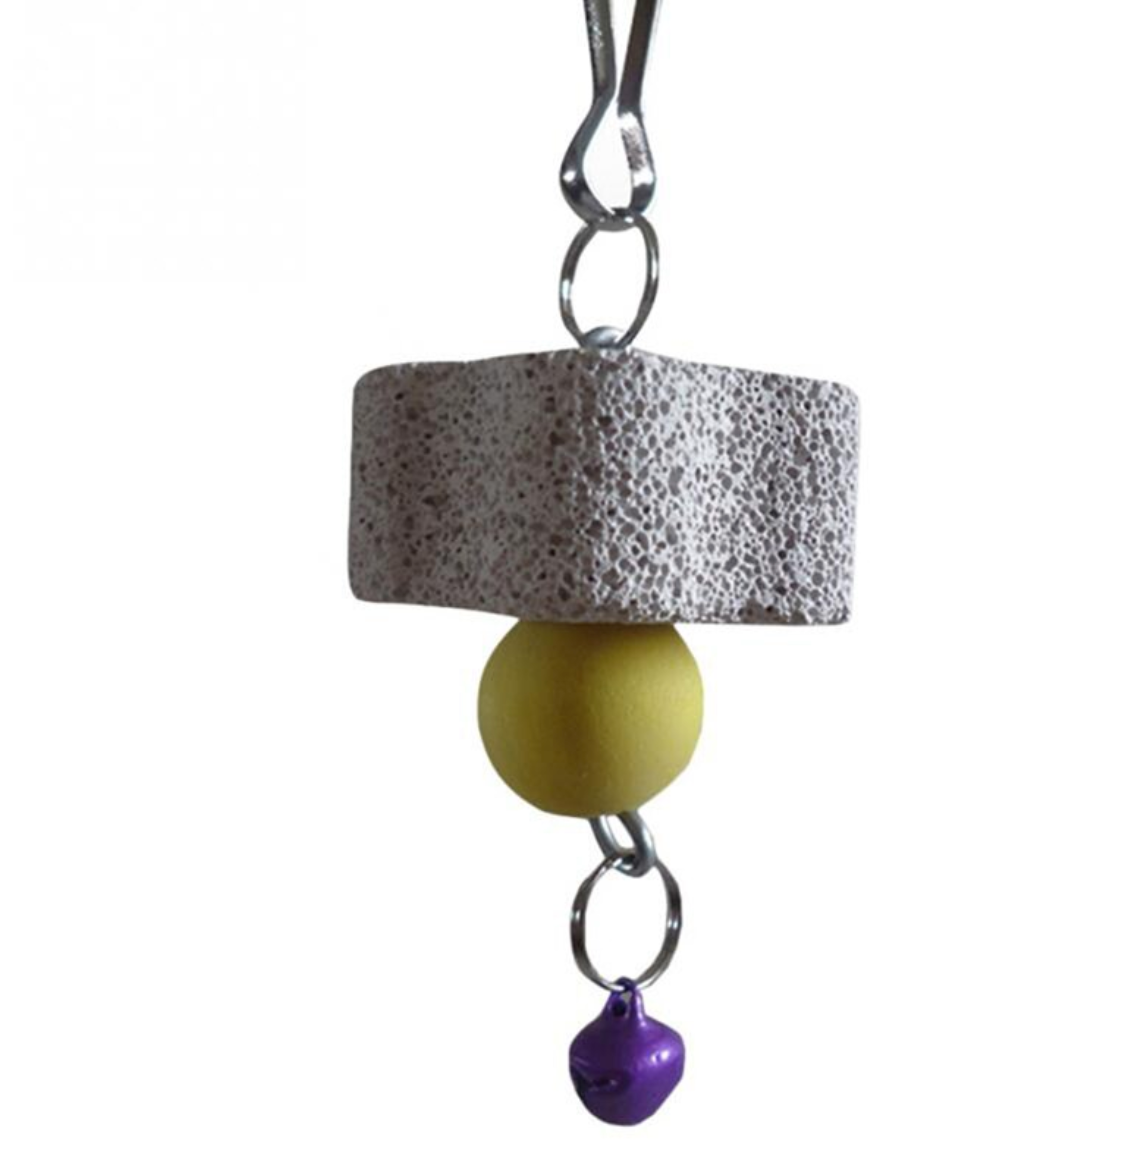 Parrot Grinding Stone Bird Toy With Bell